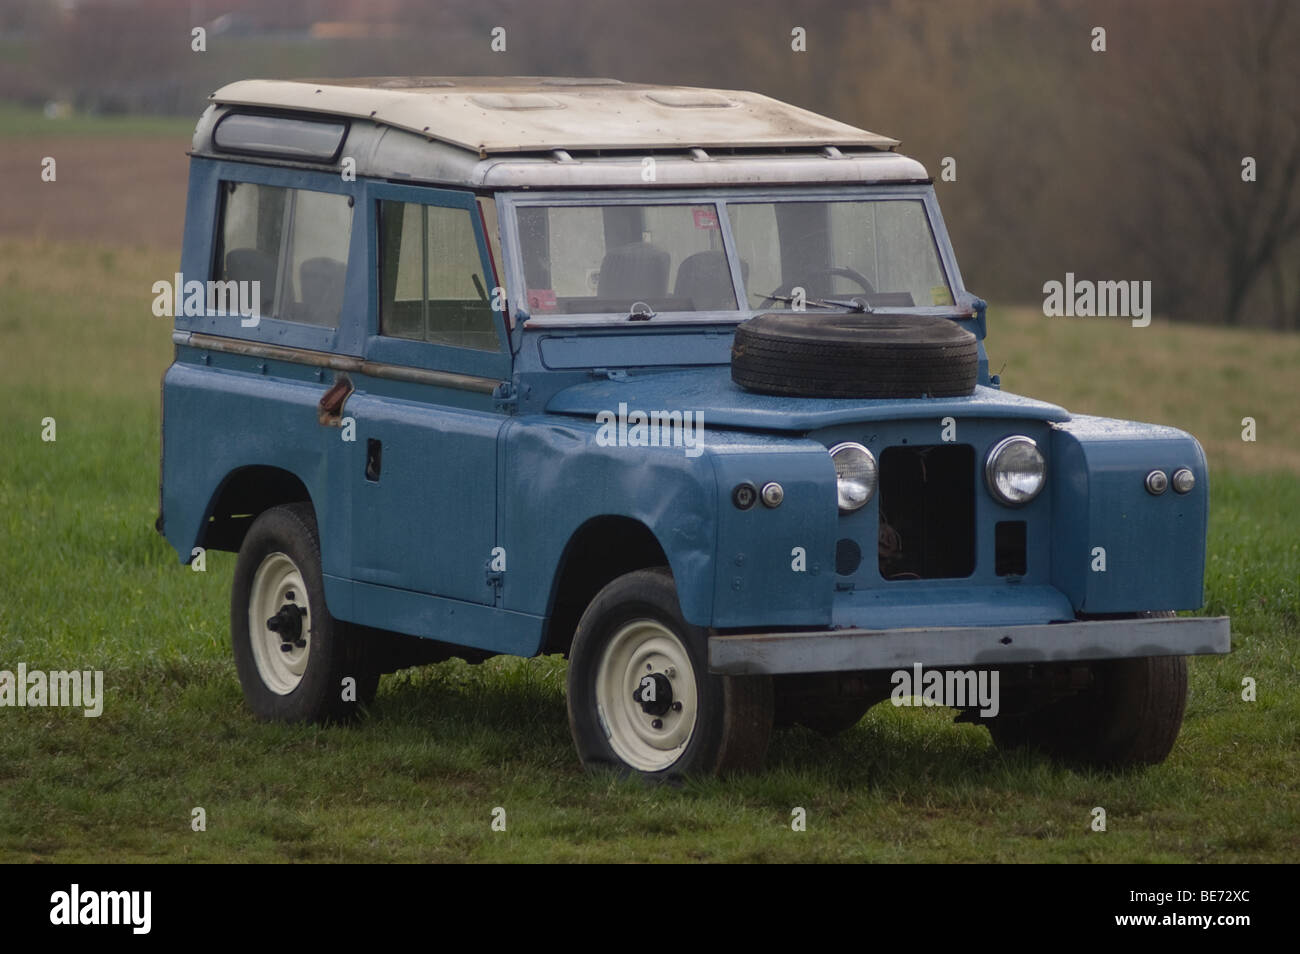 Blue Series 2a land rover 88 4x4 Stock Photo